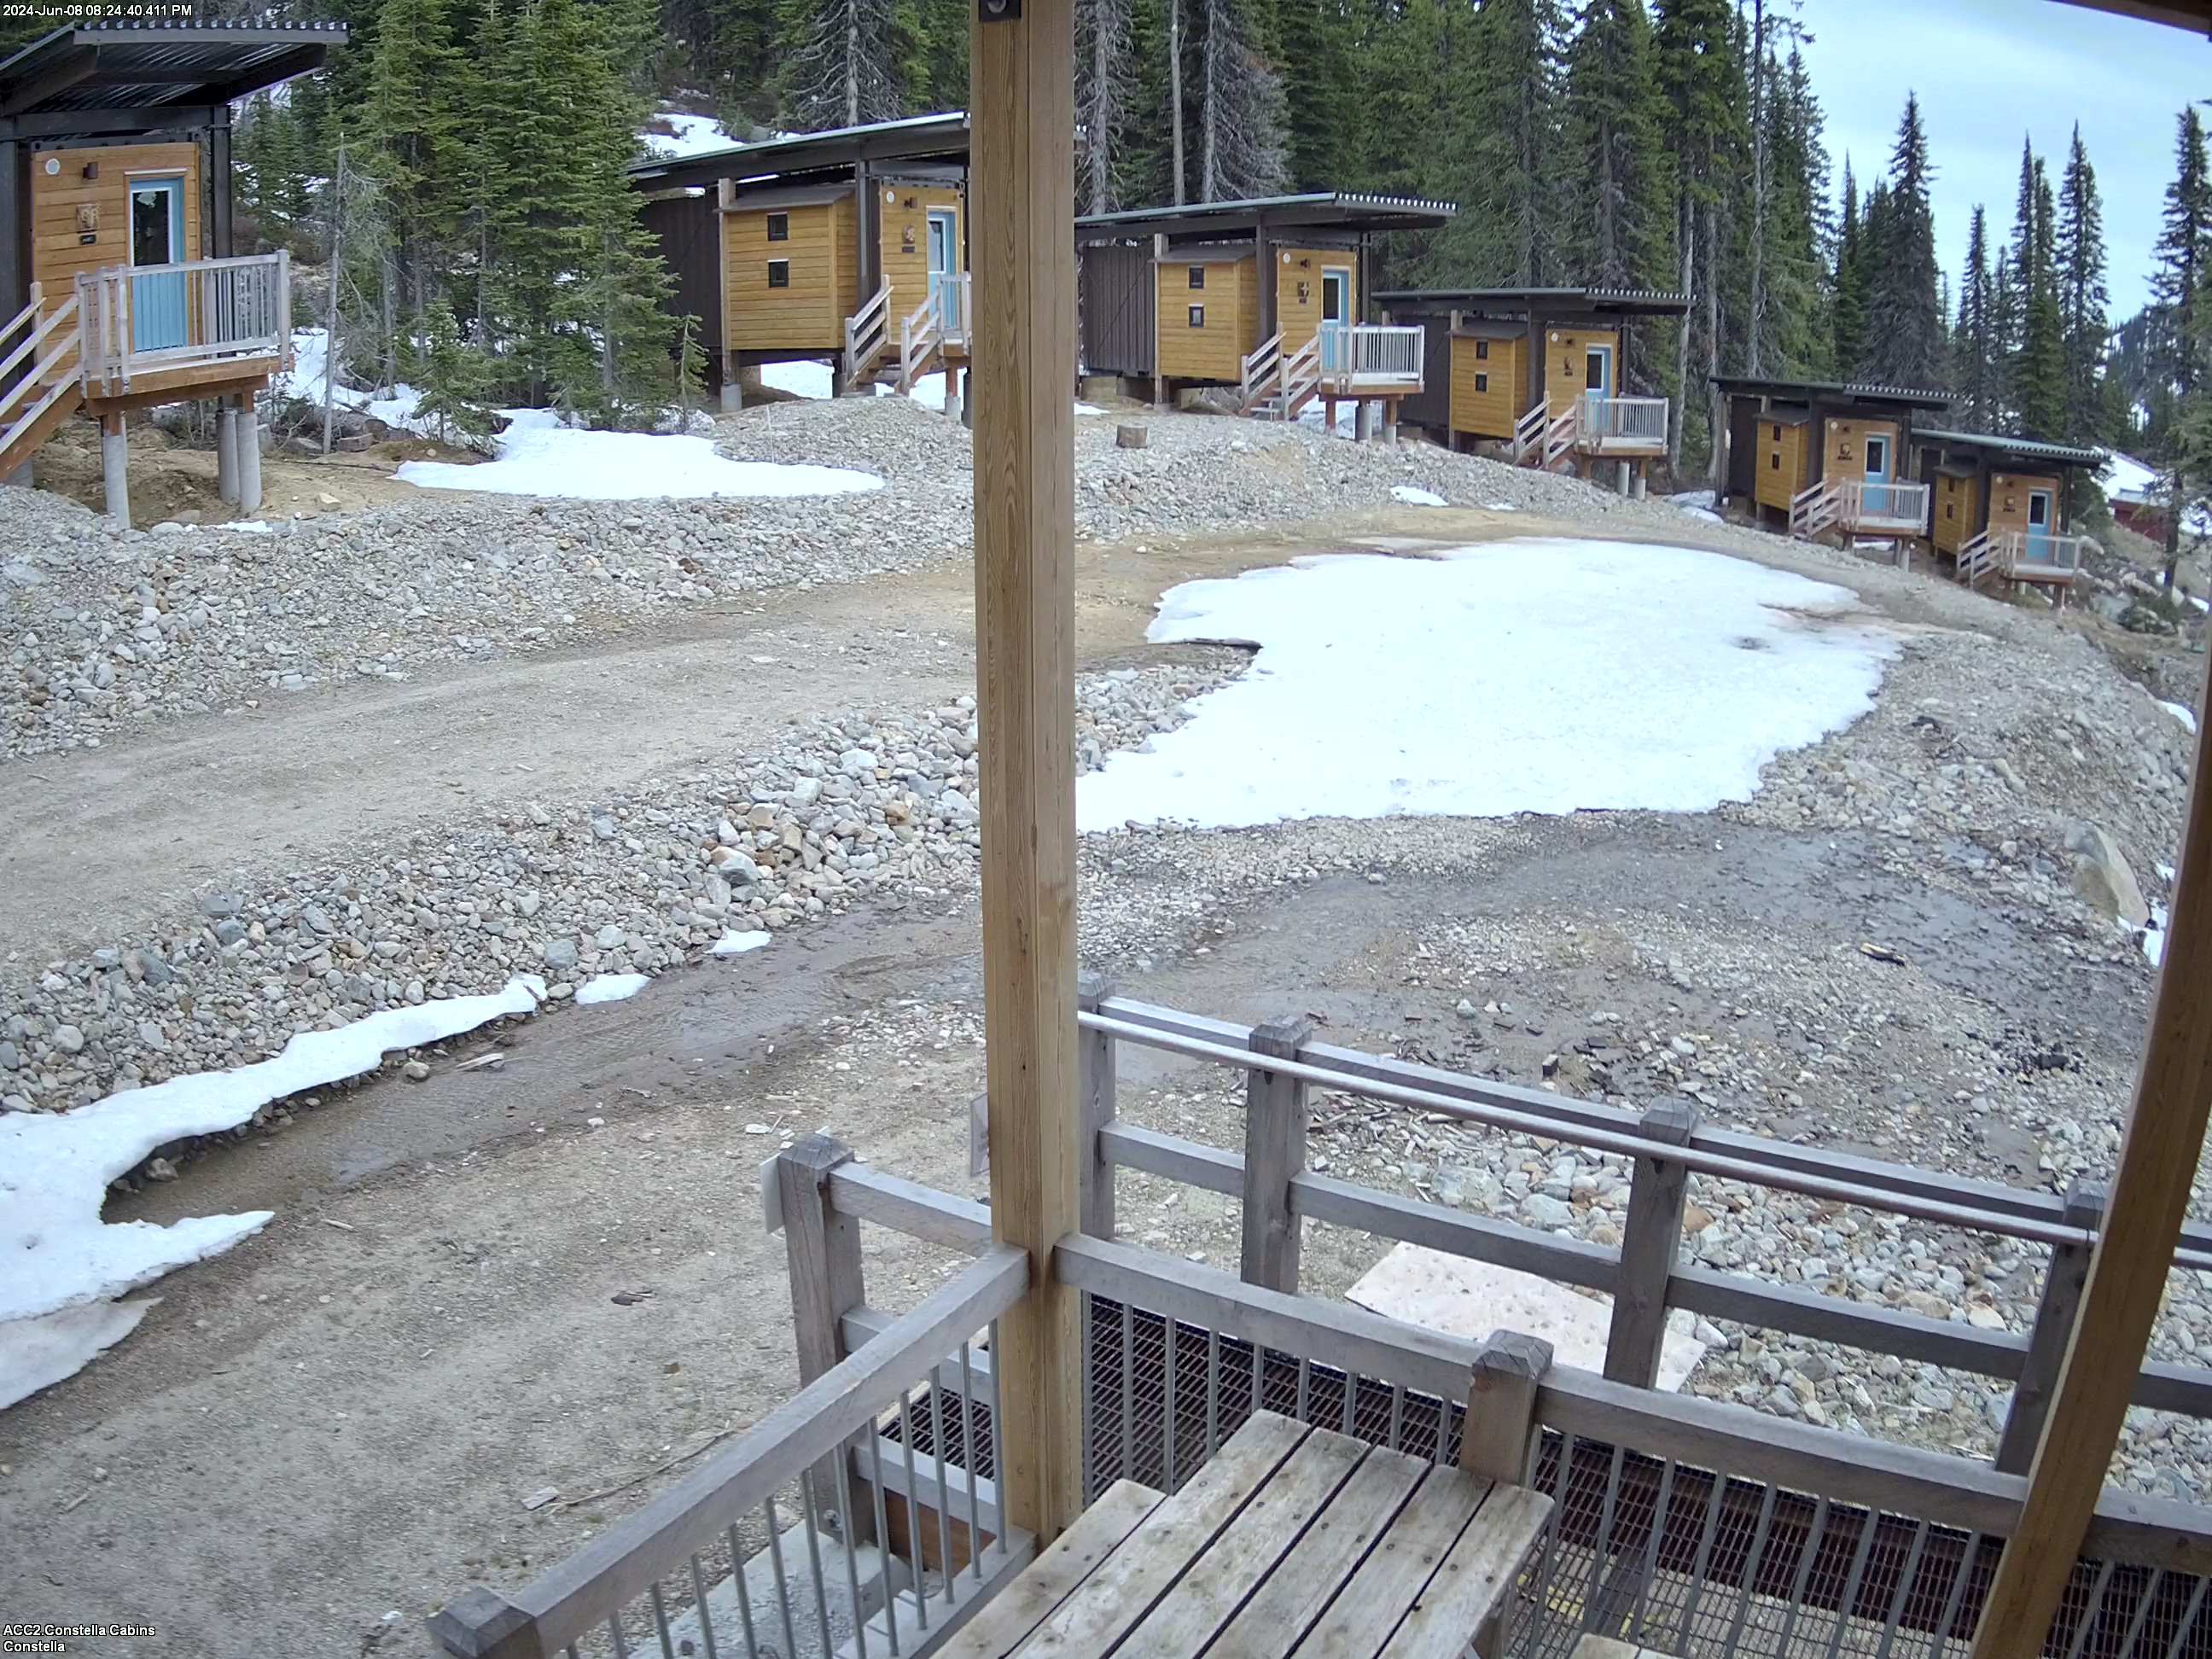 Constella Cabins | Red Mountain cams